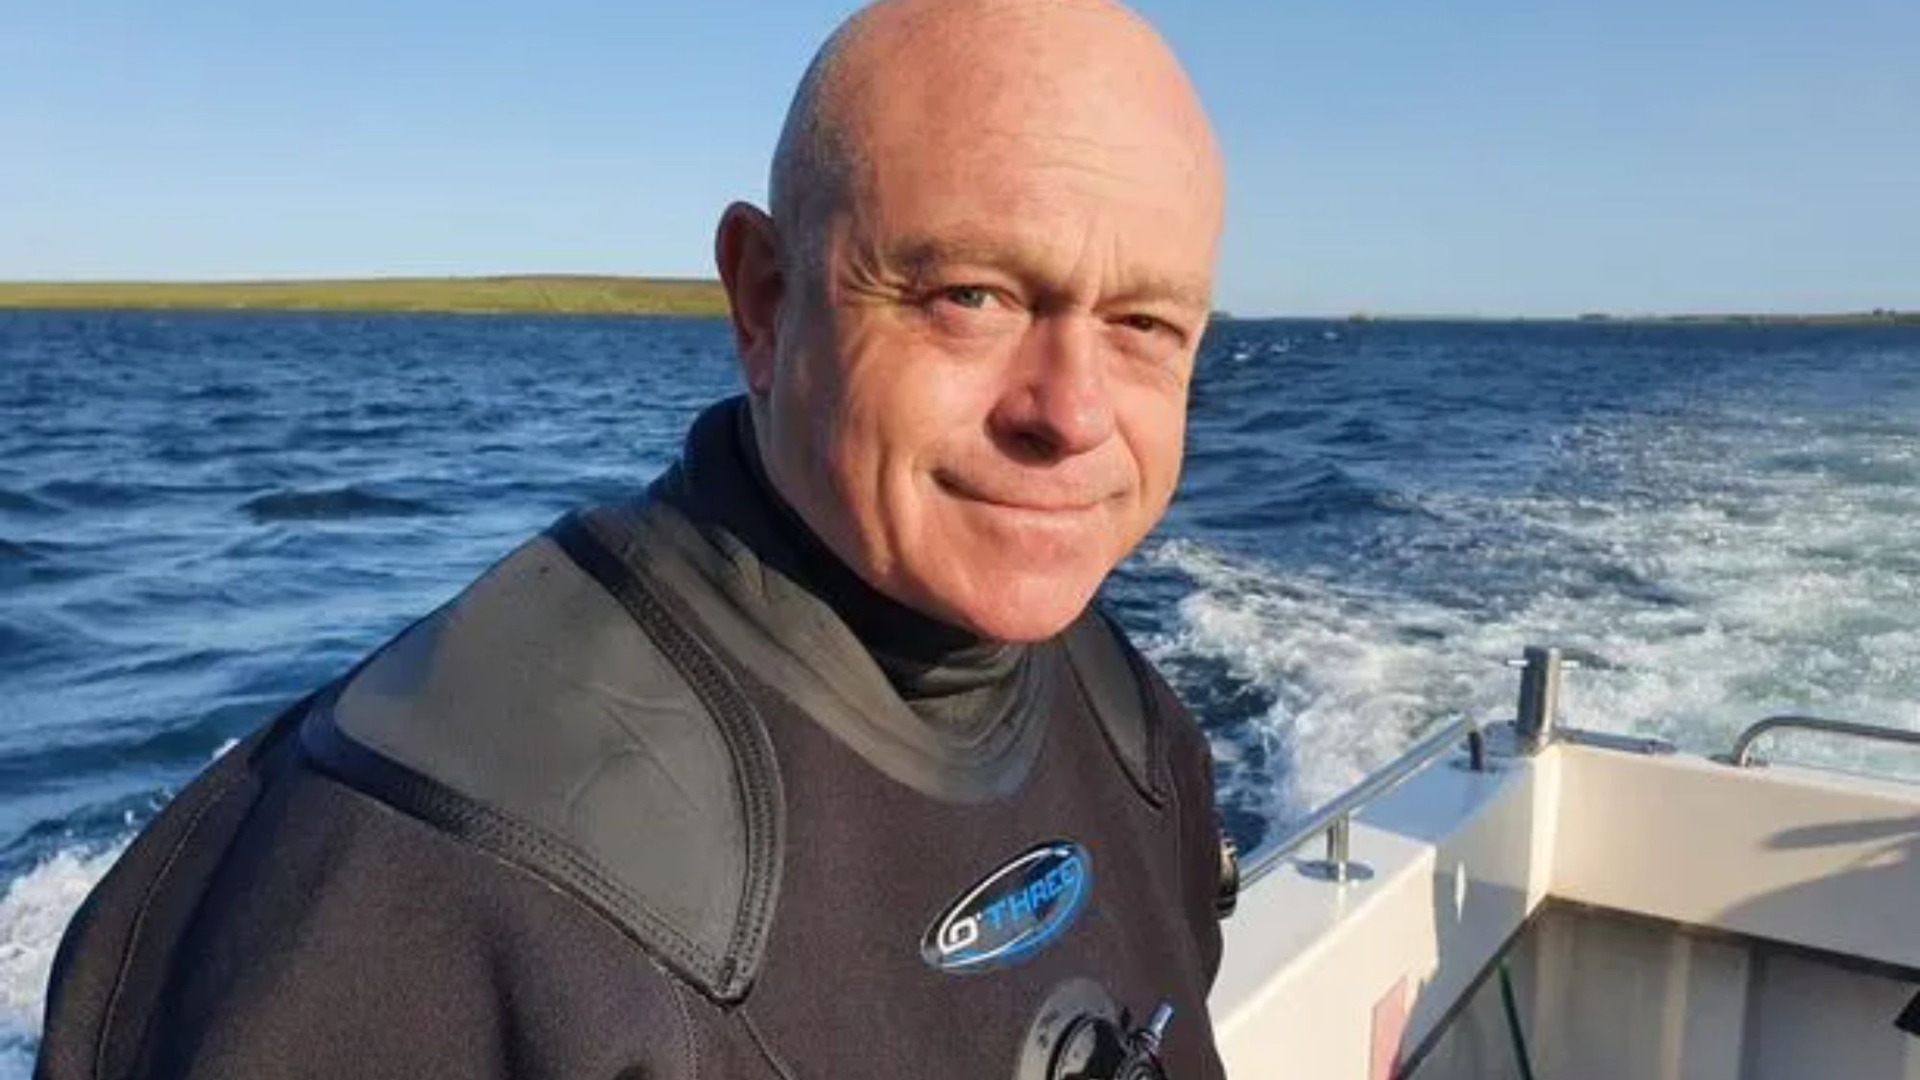 Ex-EastEnders Star Ross Kemp shares his terrifying near death experience ahead of Sky’s new show